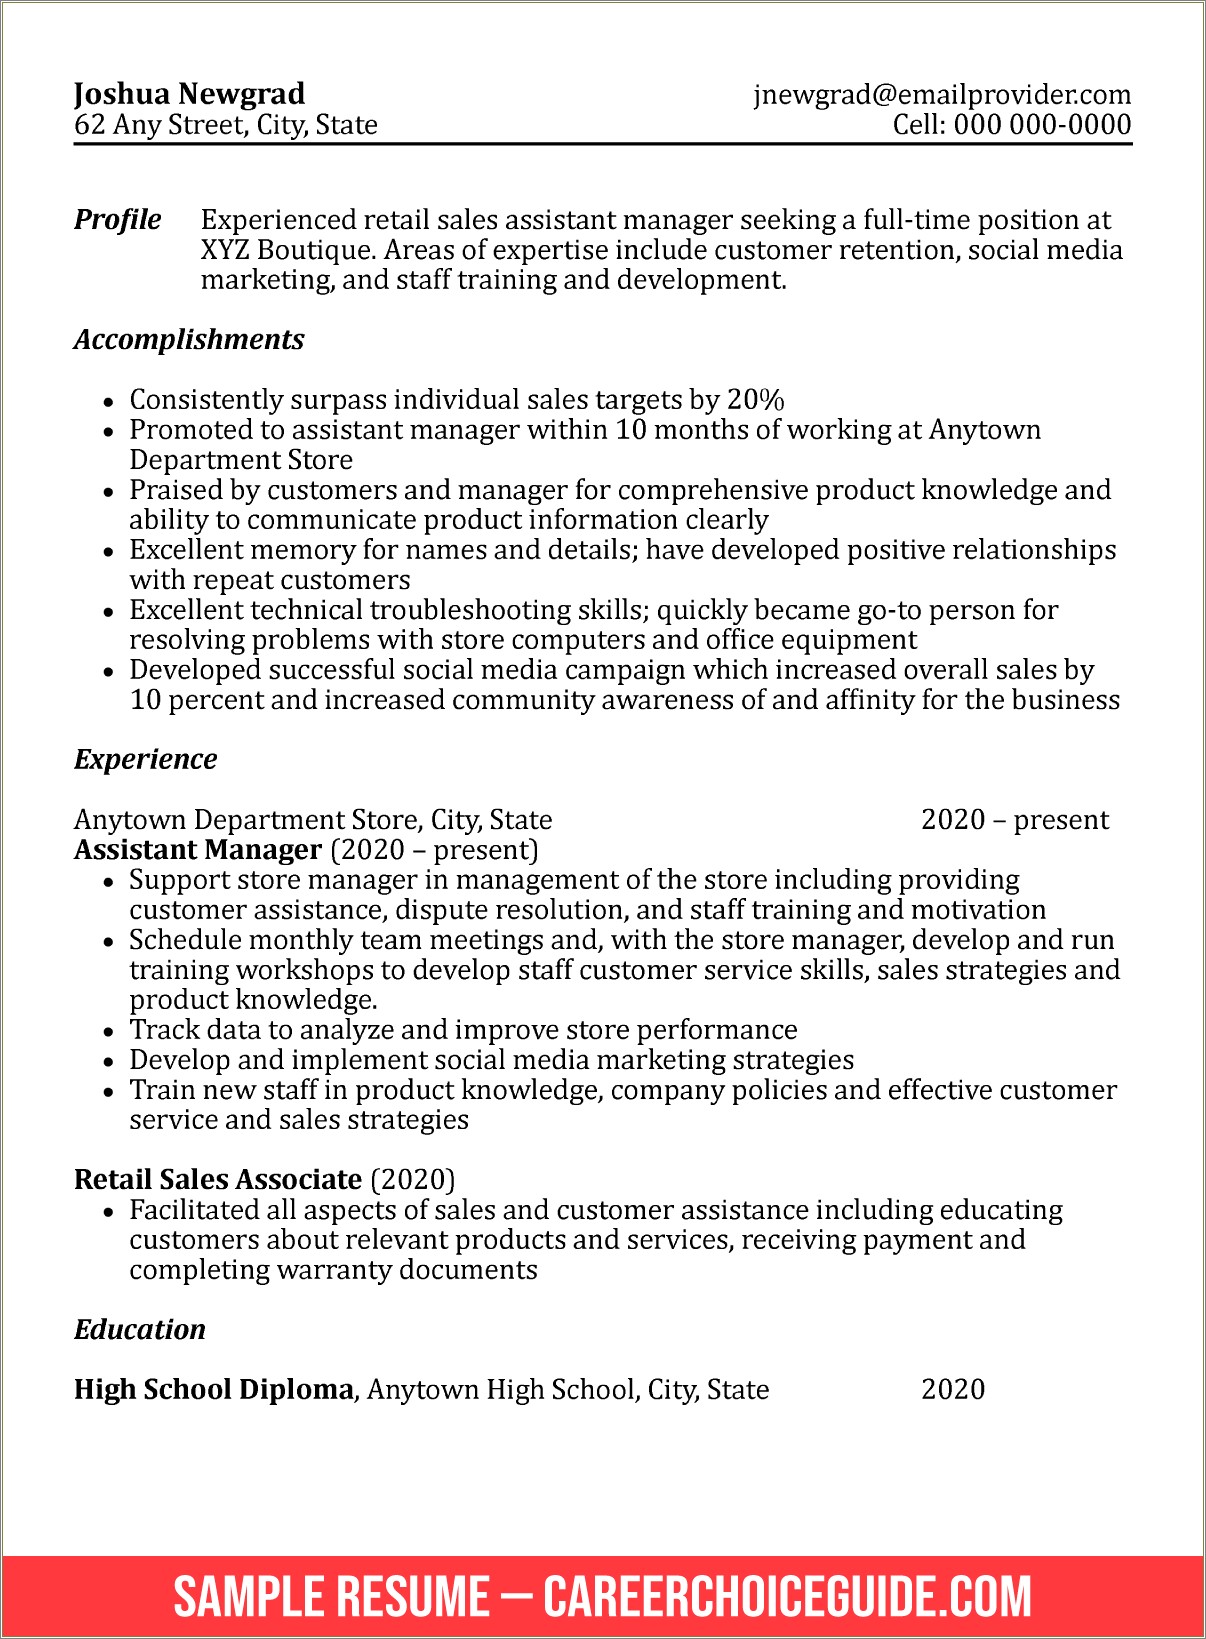 Resume Objective For A Recent College Graduate